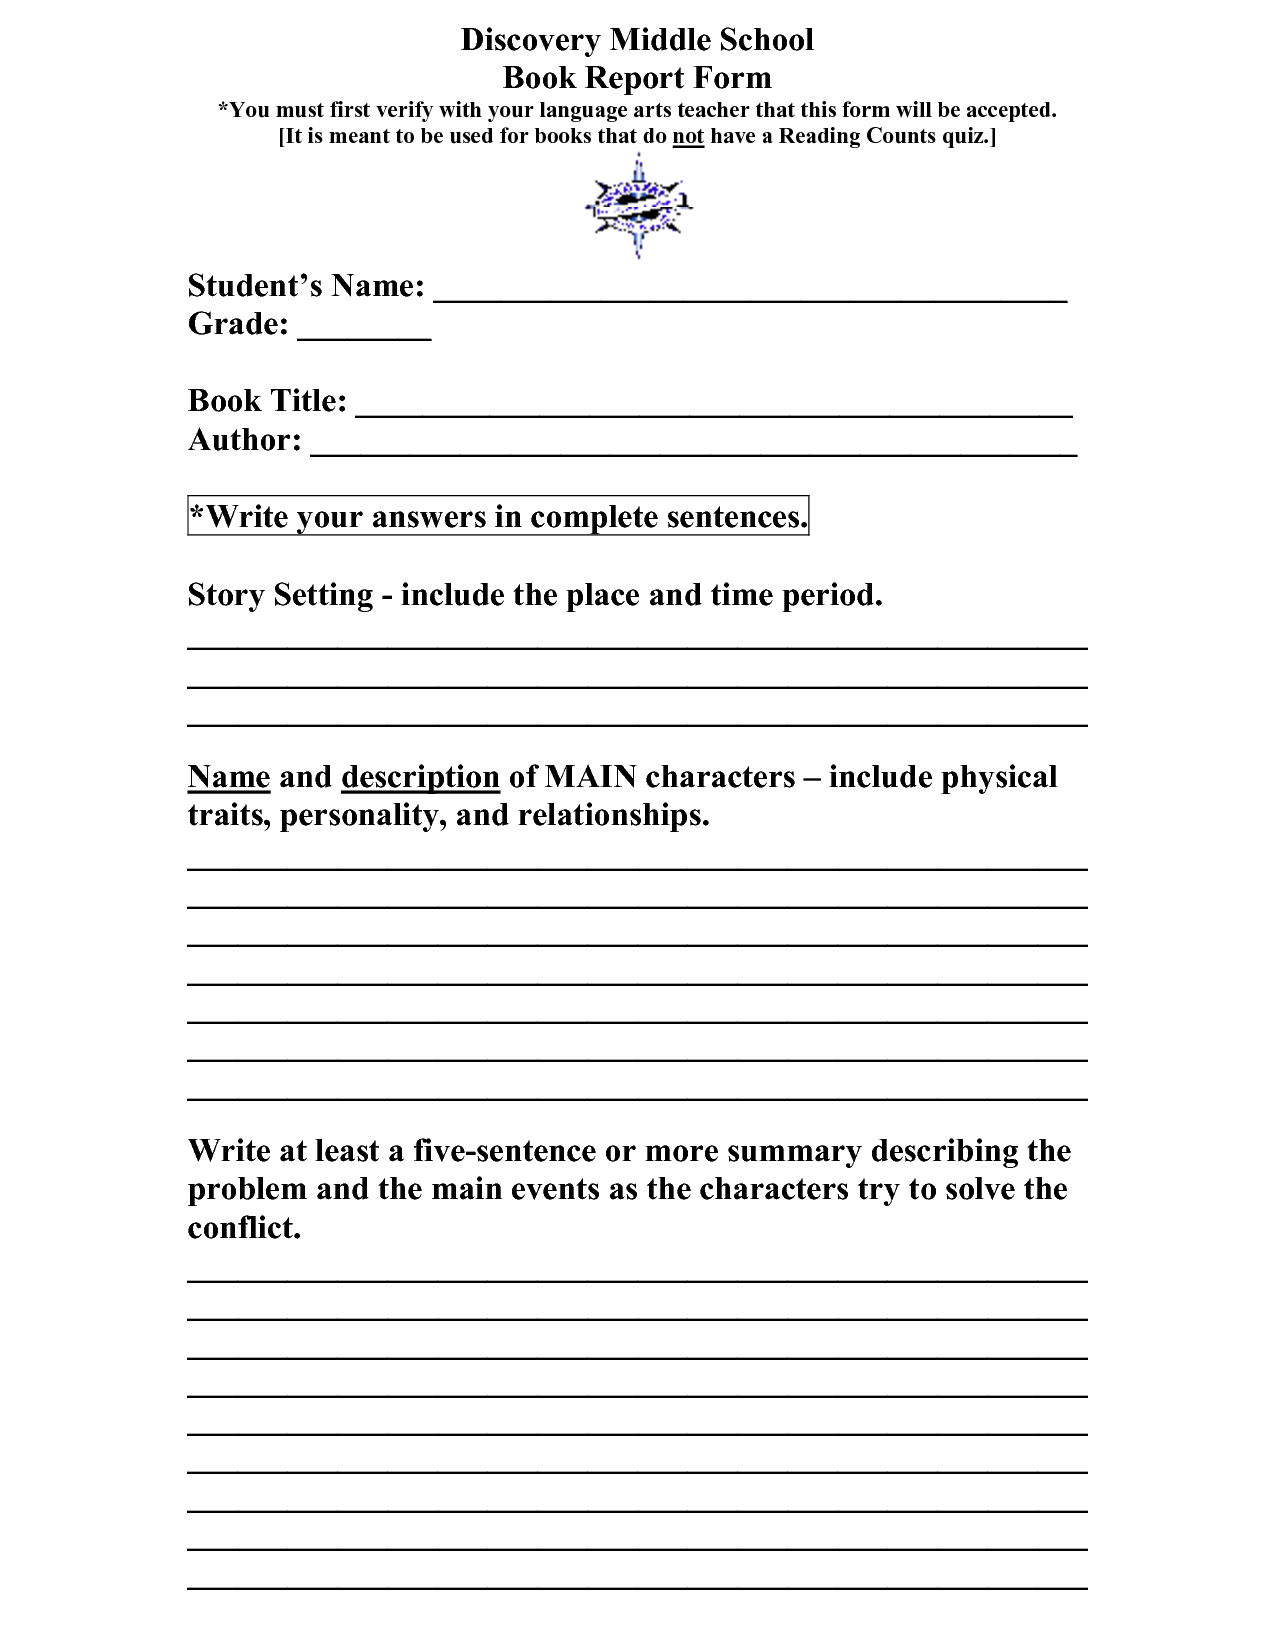 Scope Of Work Template | Teaching & Learning | High School In High School Book Report Template